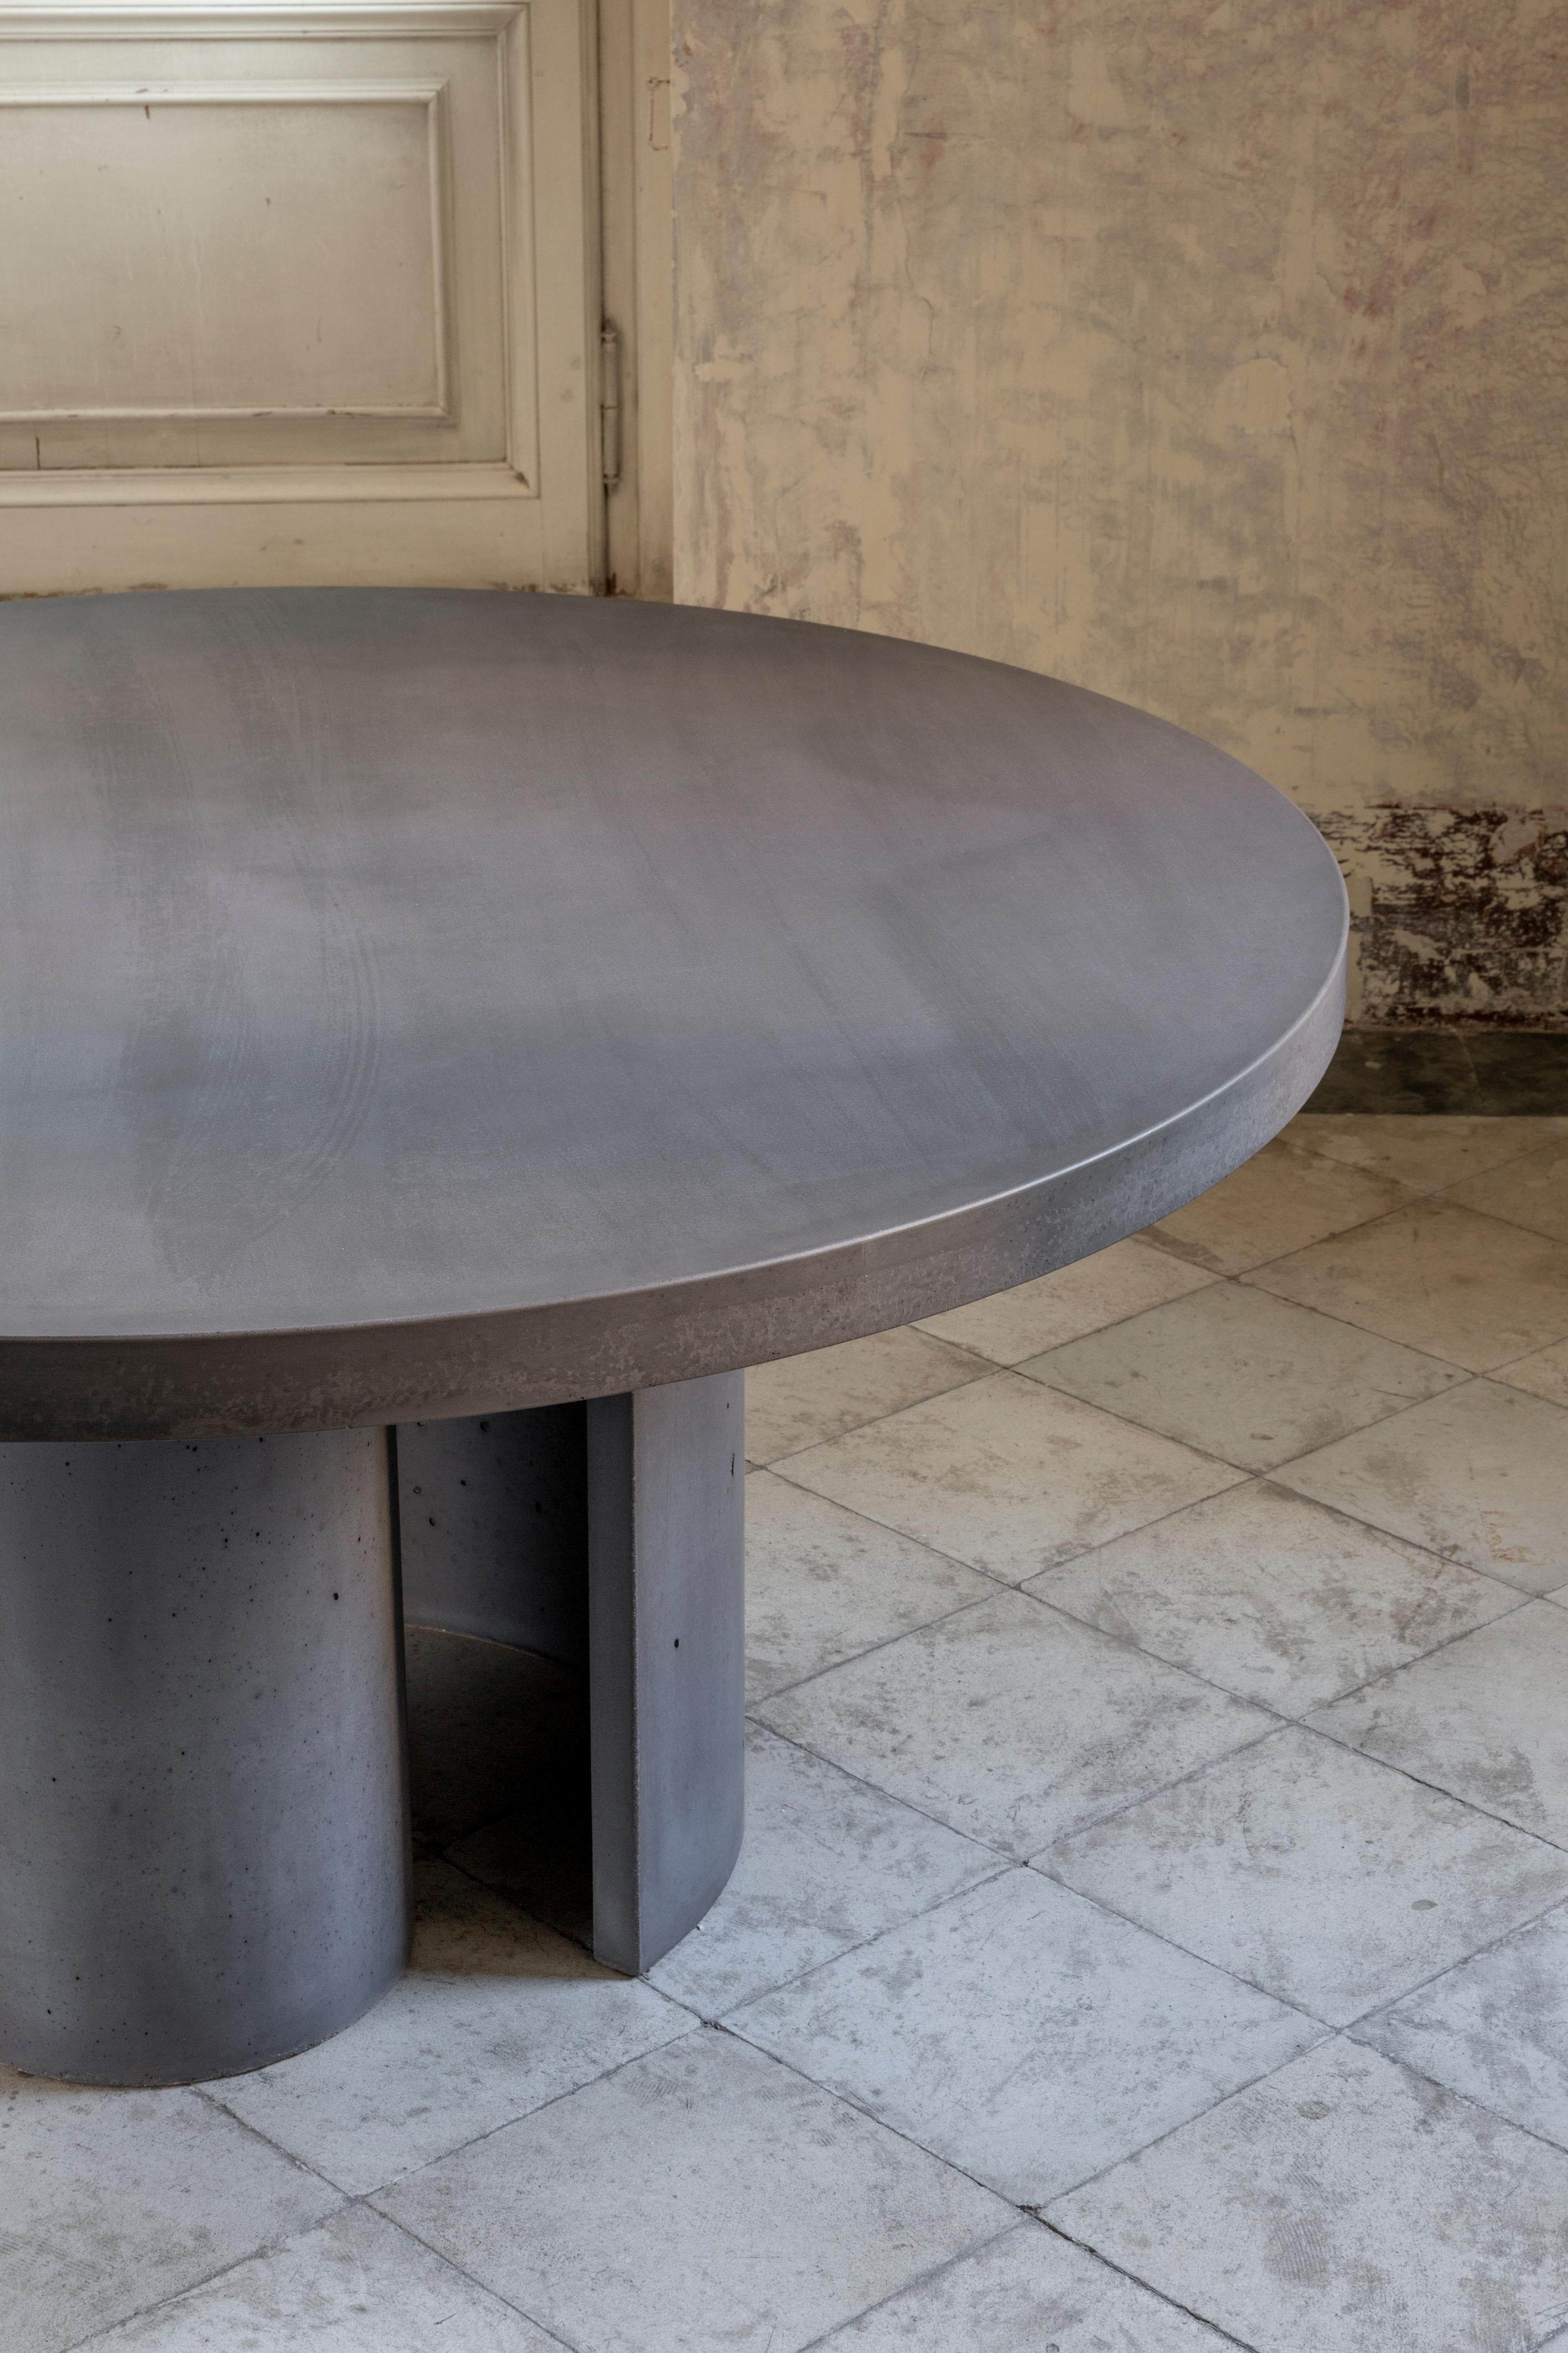 Atlante is a round dining table with essential lines and a strong inspiration. 
Completely fashioned in UHPC concrete mortar by a team of expert artisans, this table perfeclty emodies the values of the Euclide Collection in which it is inserted.